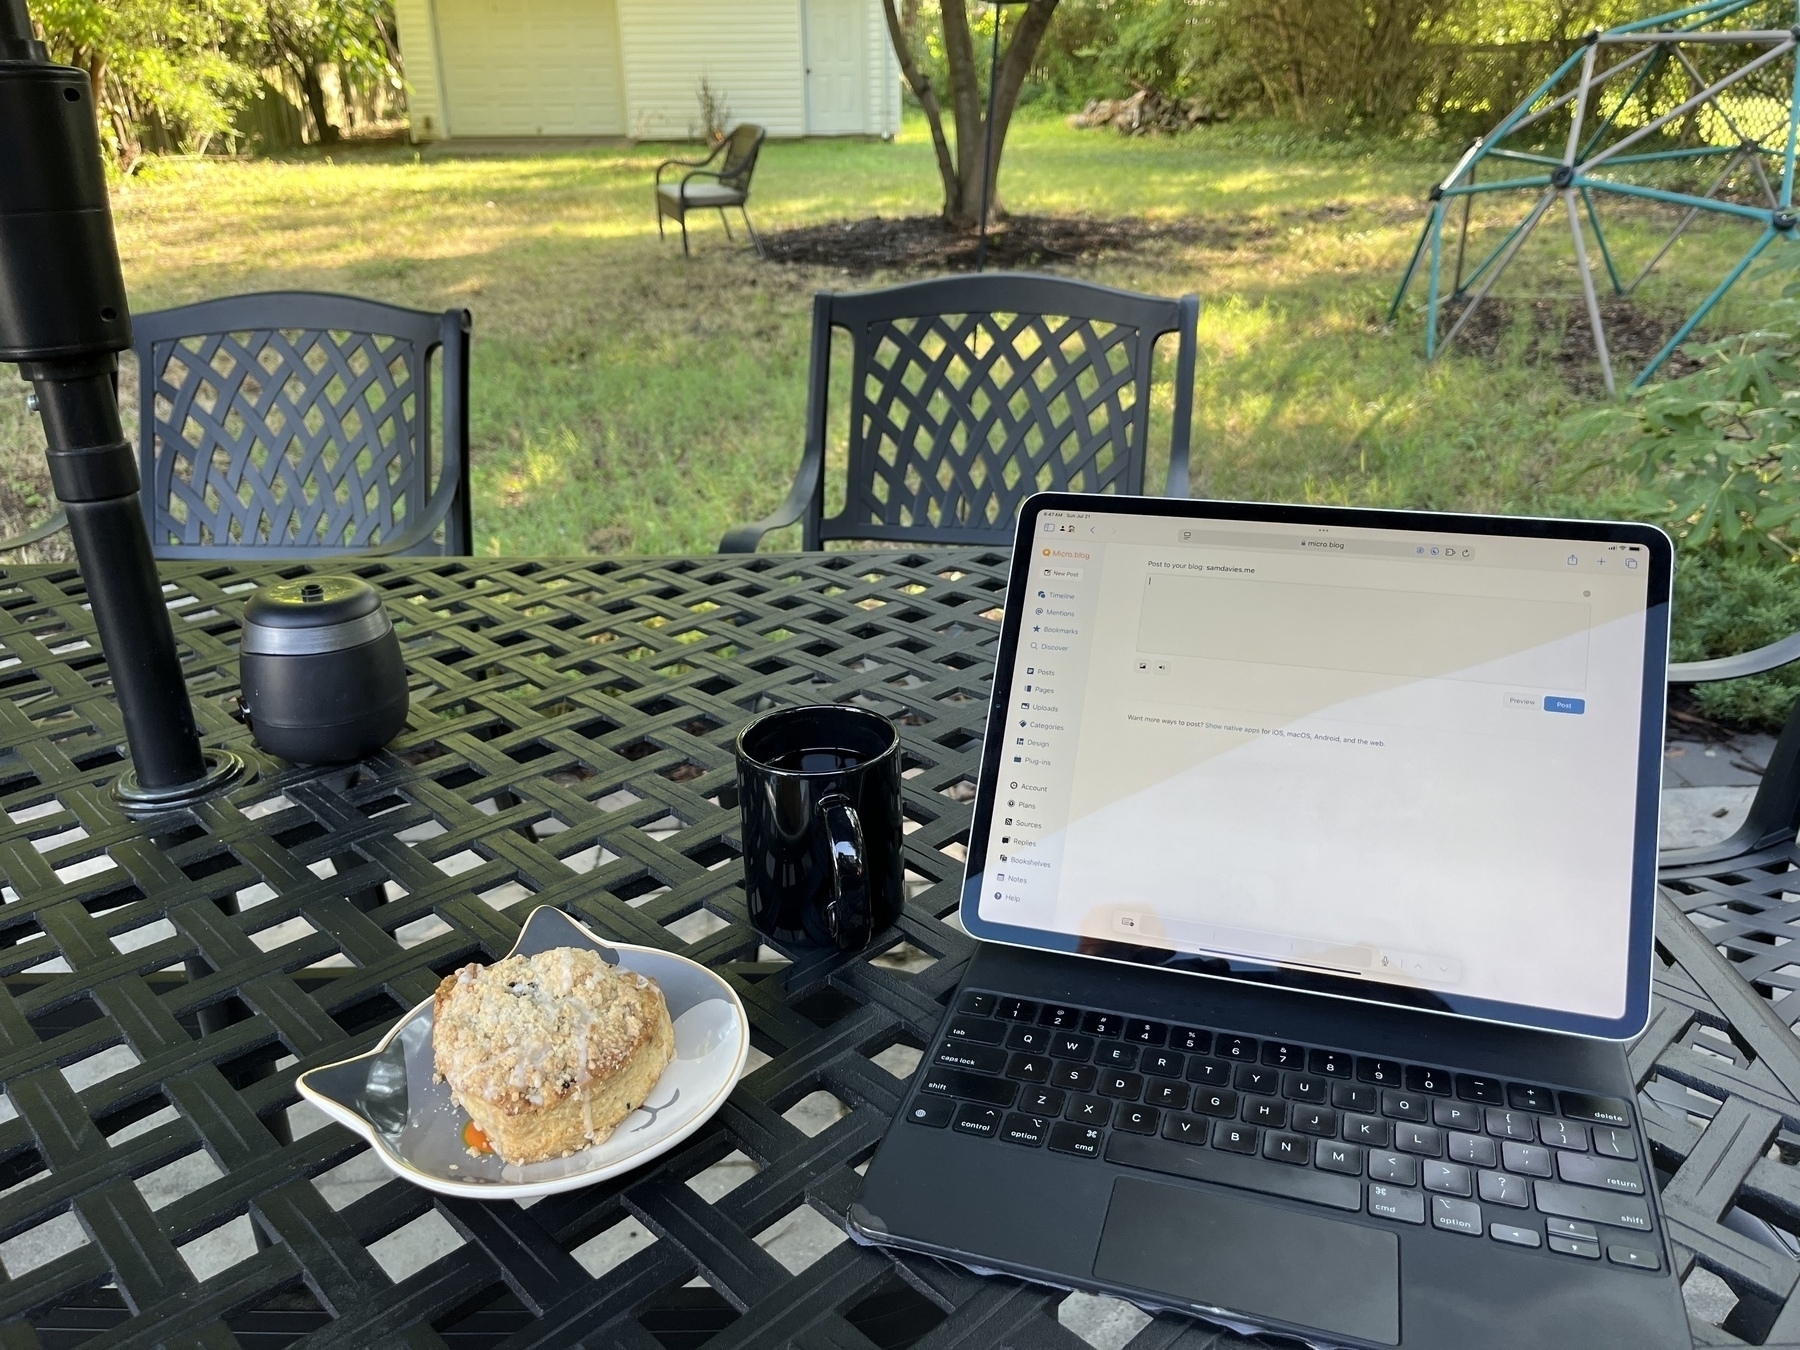 A metal patio table with a scone on a kitty plate. A black mug of tea. An iPad in a keyboard case open to micro.blog.